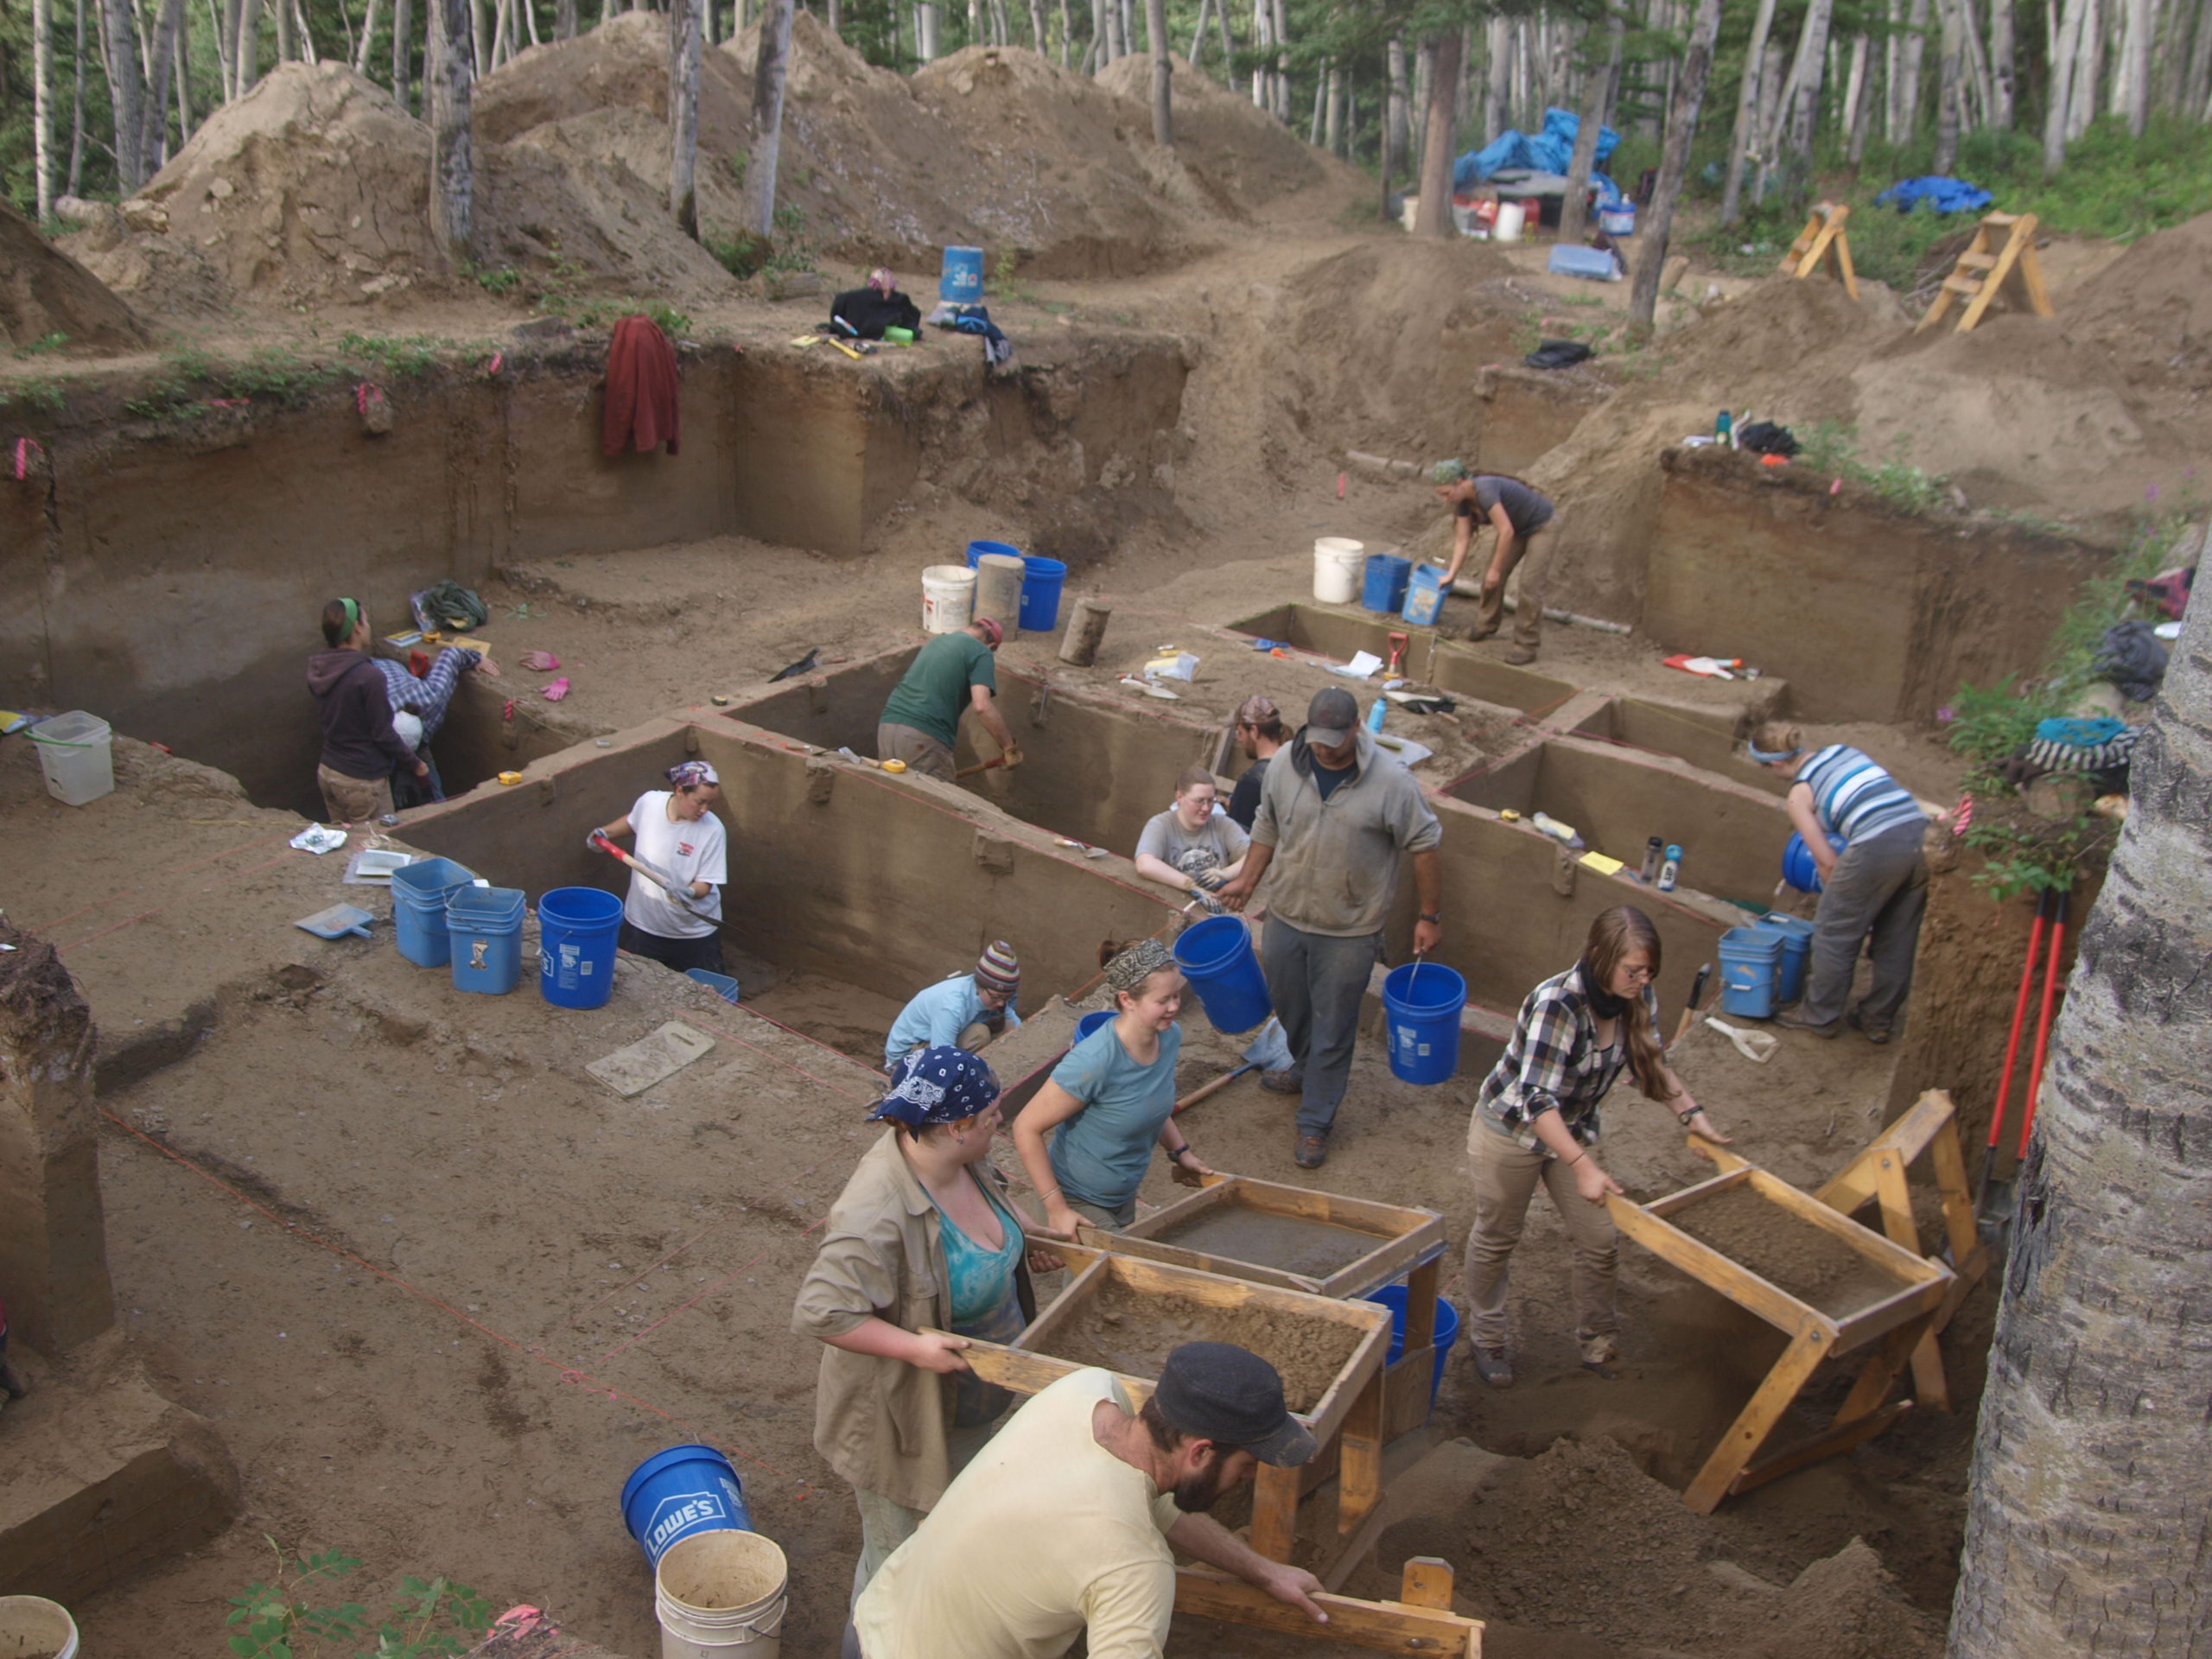 Discovery Of Unknown Ancient Population Changes Our Understanding Of How North America Was Settled